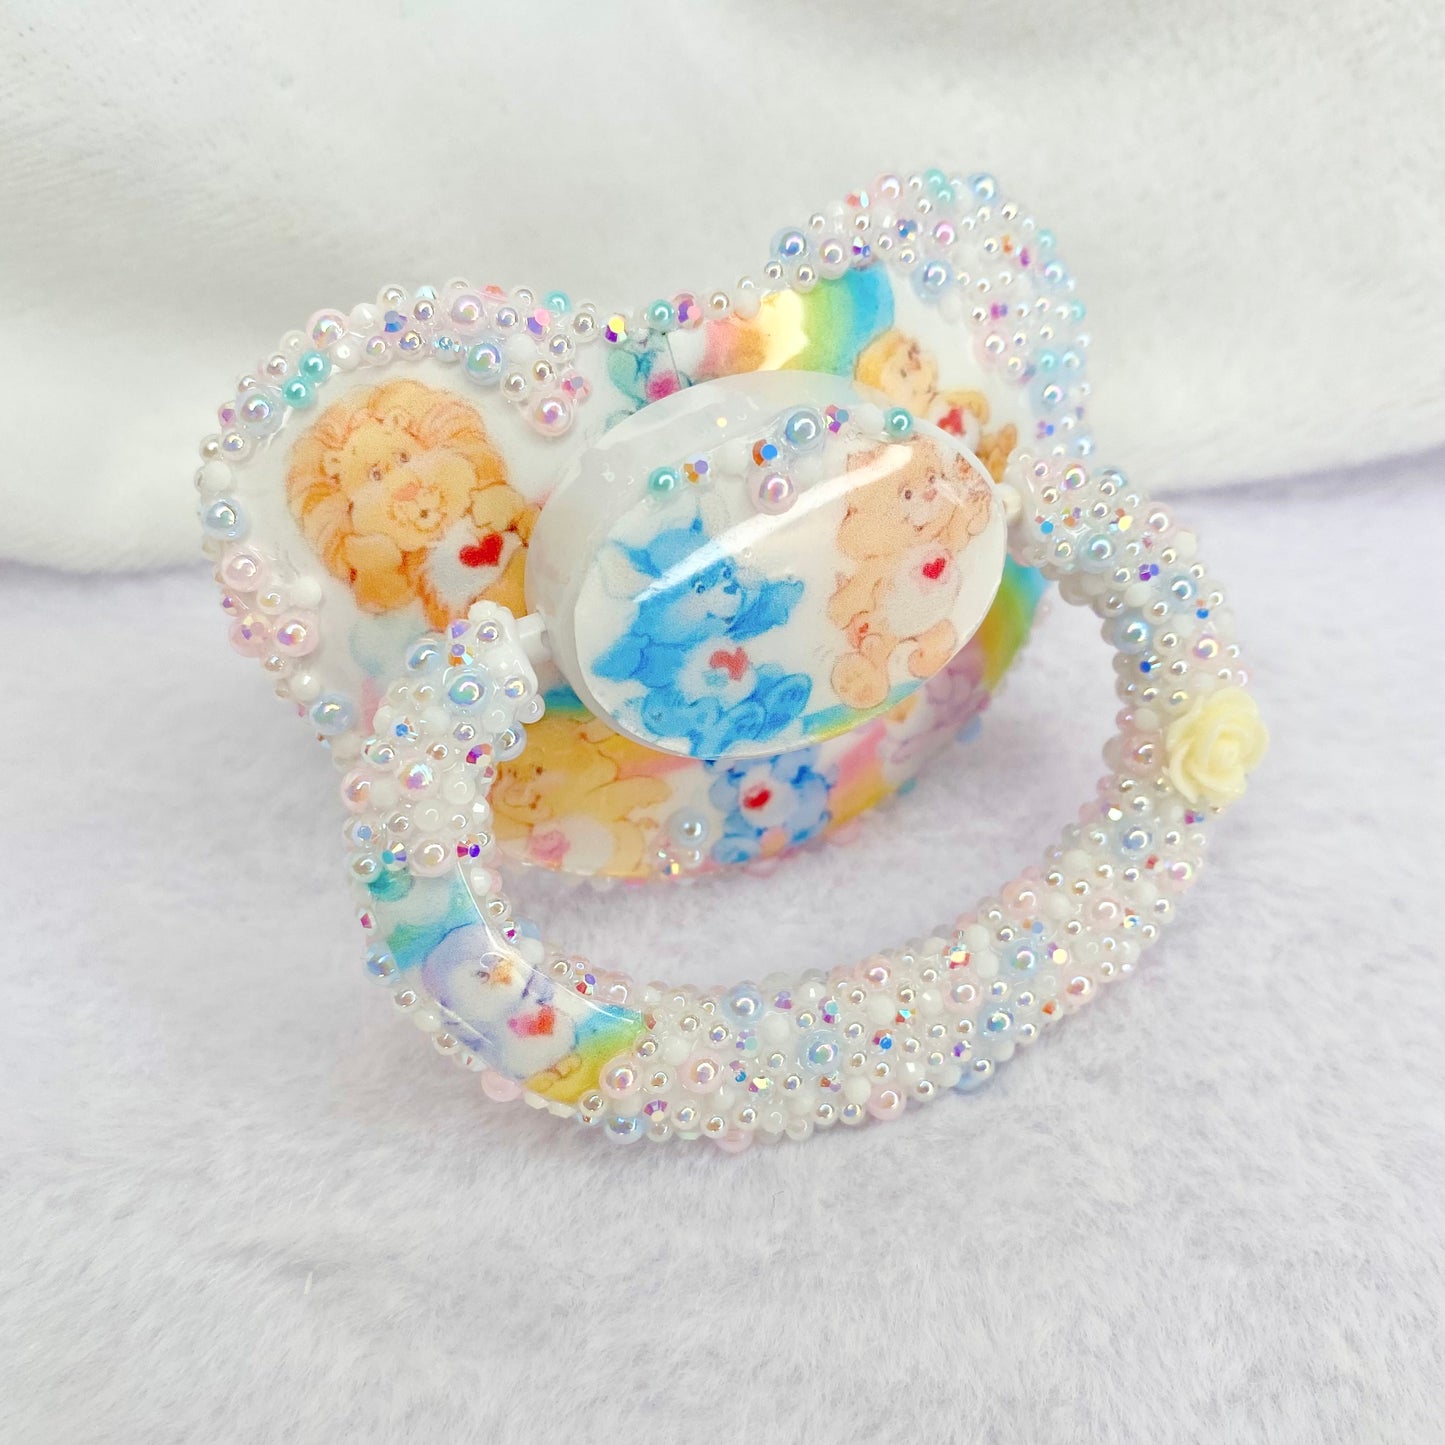 Caring Cousins Carebears - Adult pacifier